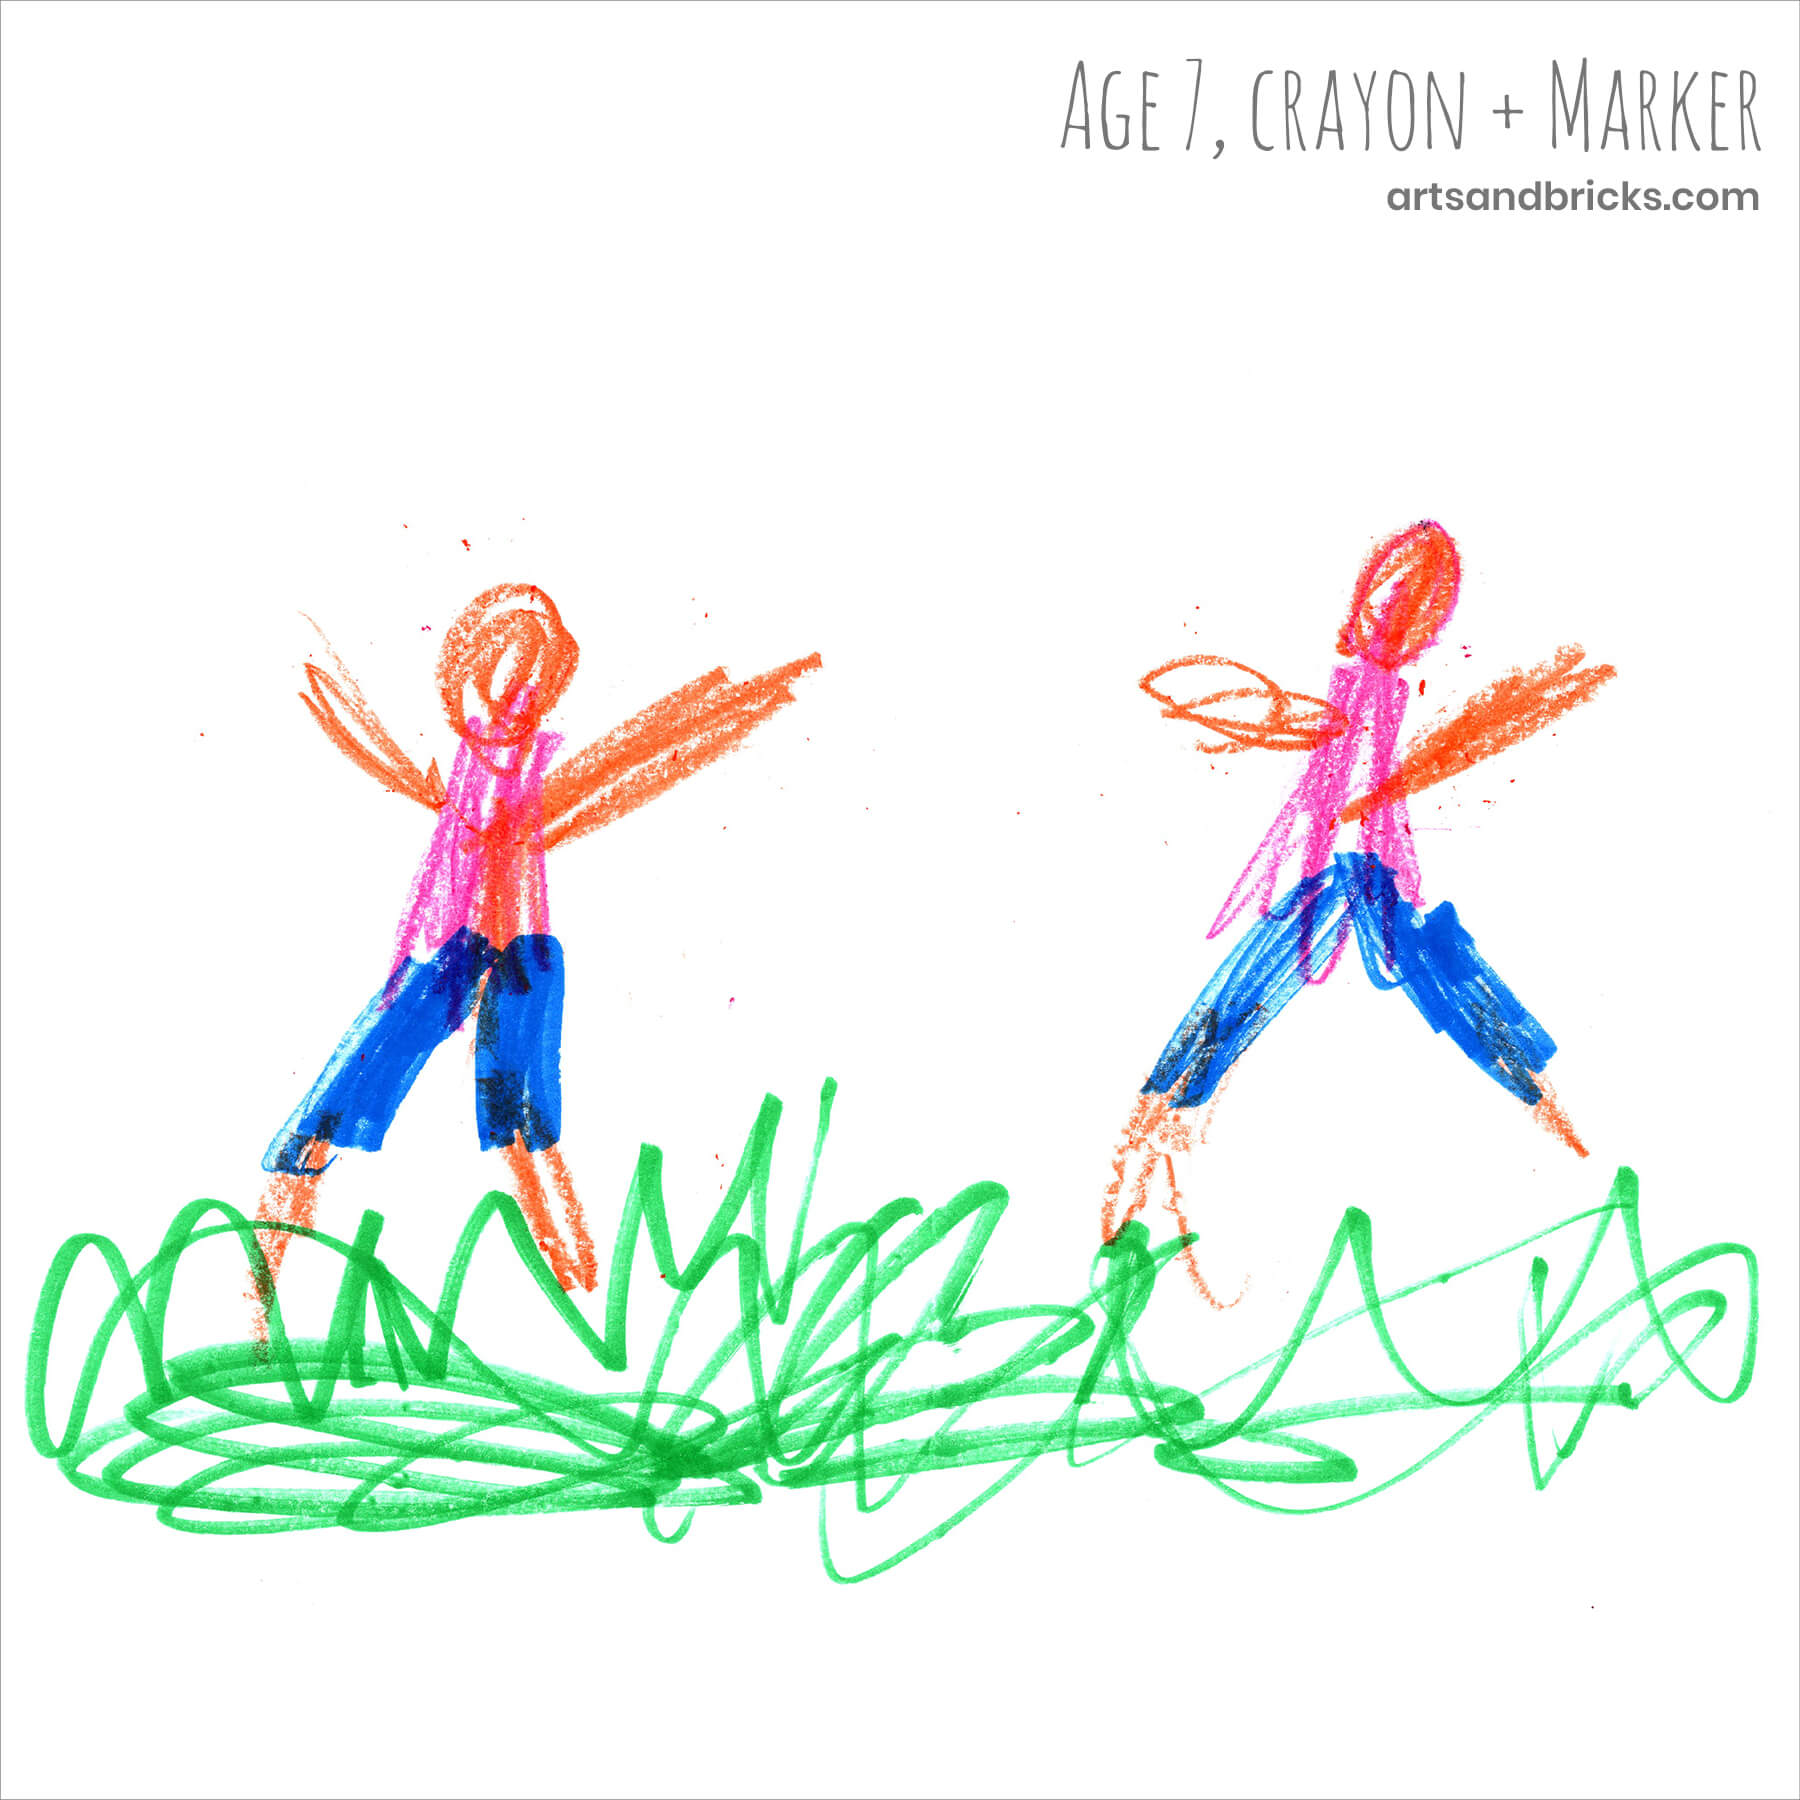 I'm fascinated by how my children draw, paint, and doodle themselves, our family, and others. The way their renderings of the human form have changed over the years is fascinating. 

Here is one my favorite drawings of people created by a favorite little person! 

Dancing and playing in the grass, these marker and crayon figures have weight and thickness to their bodies.